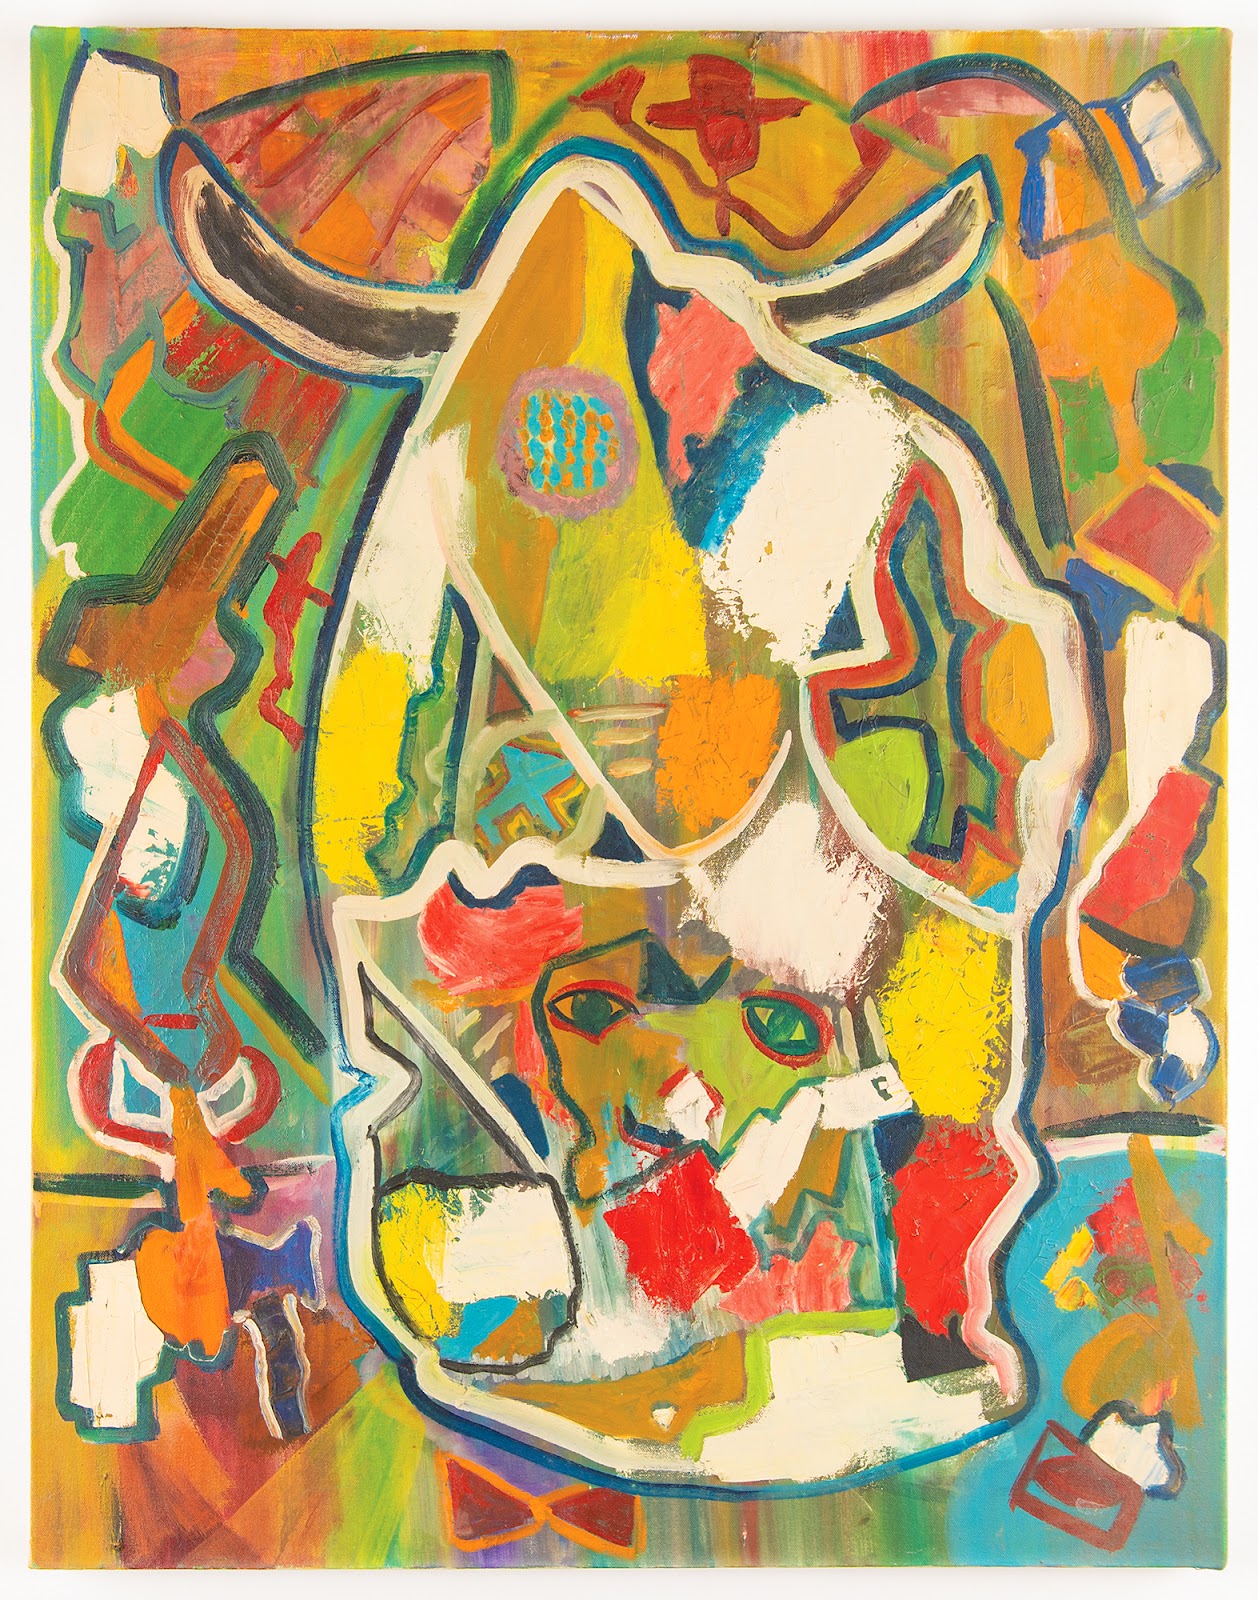 Bob Dylan’s large and colorful abstract painting.